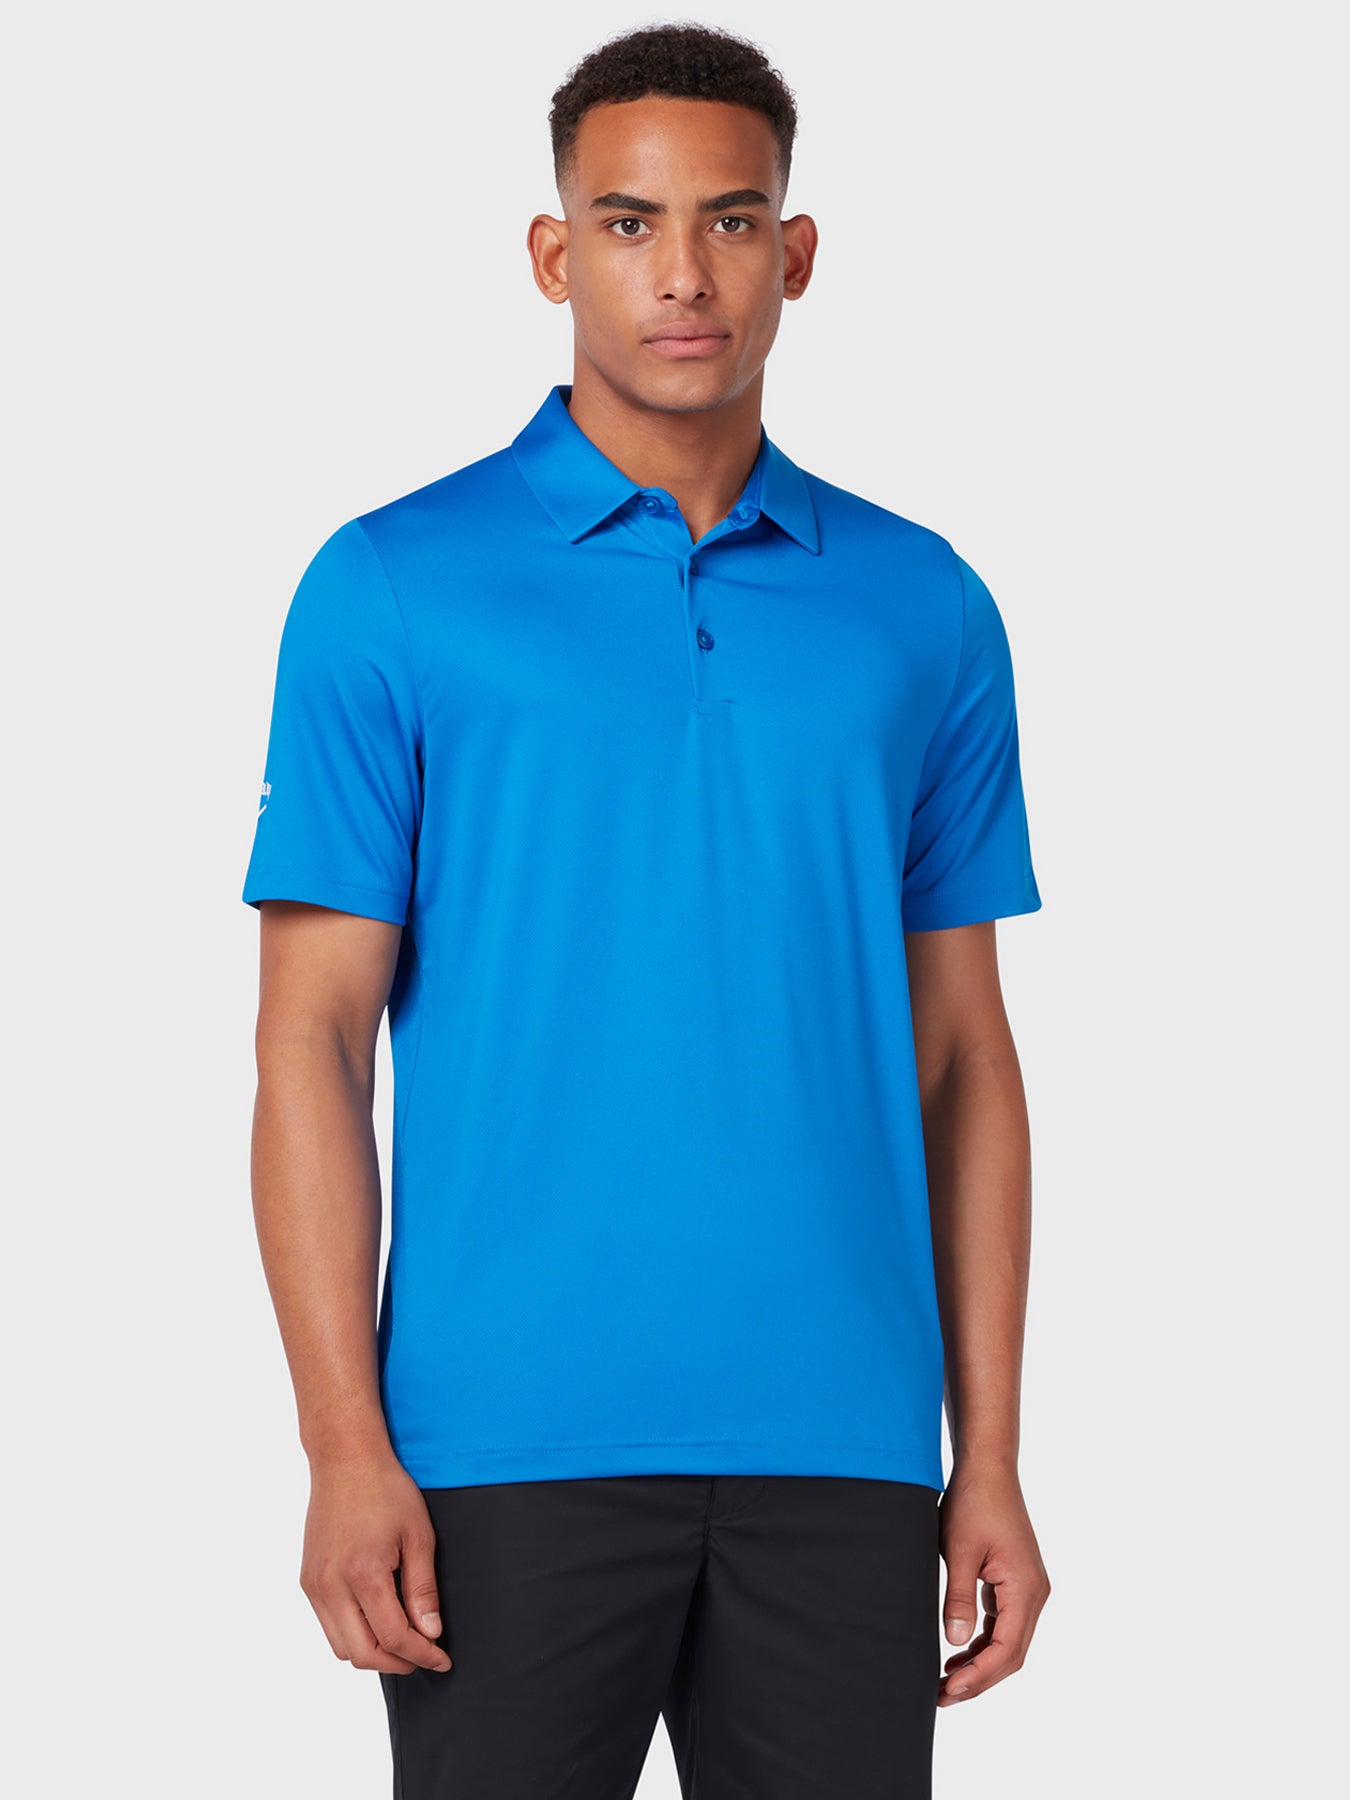 View Swing Tech Tour Polo In Magnetic Blue Magnetic Blue XXL information